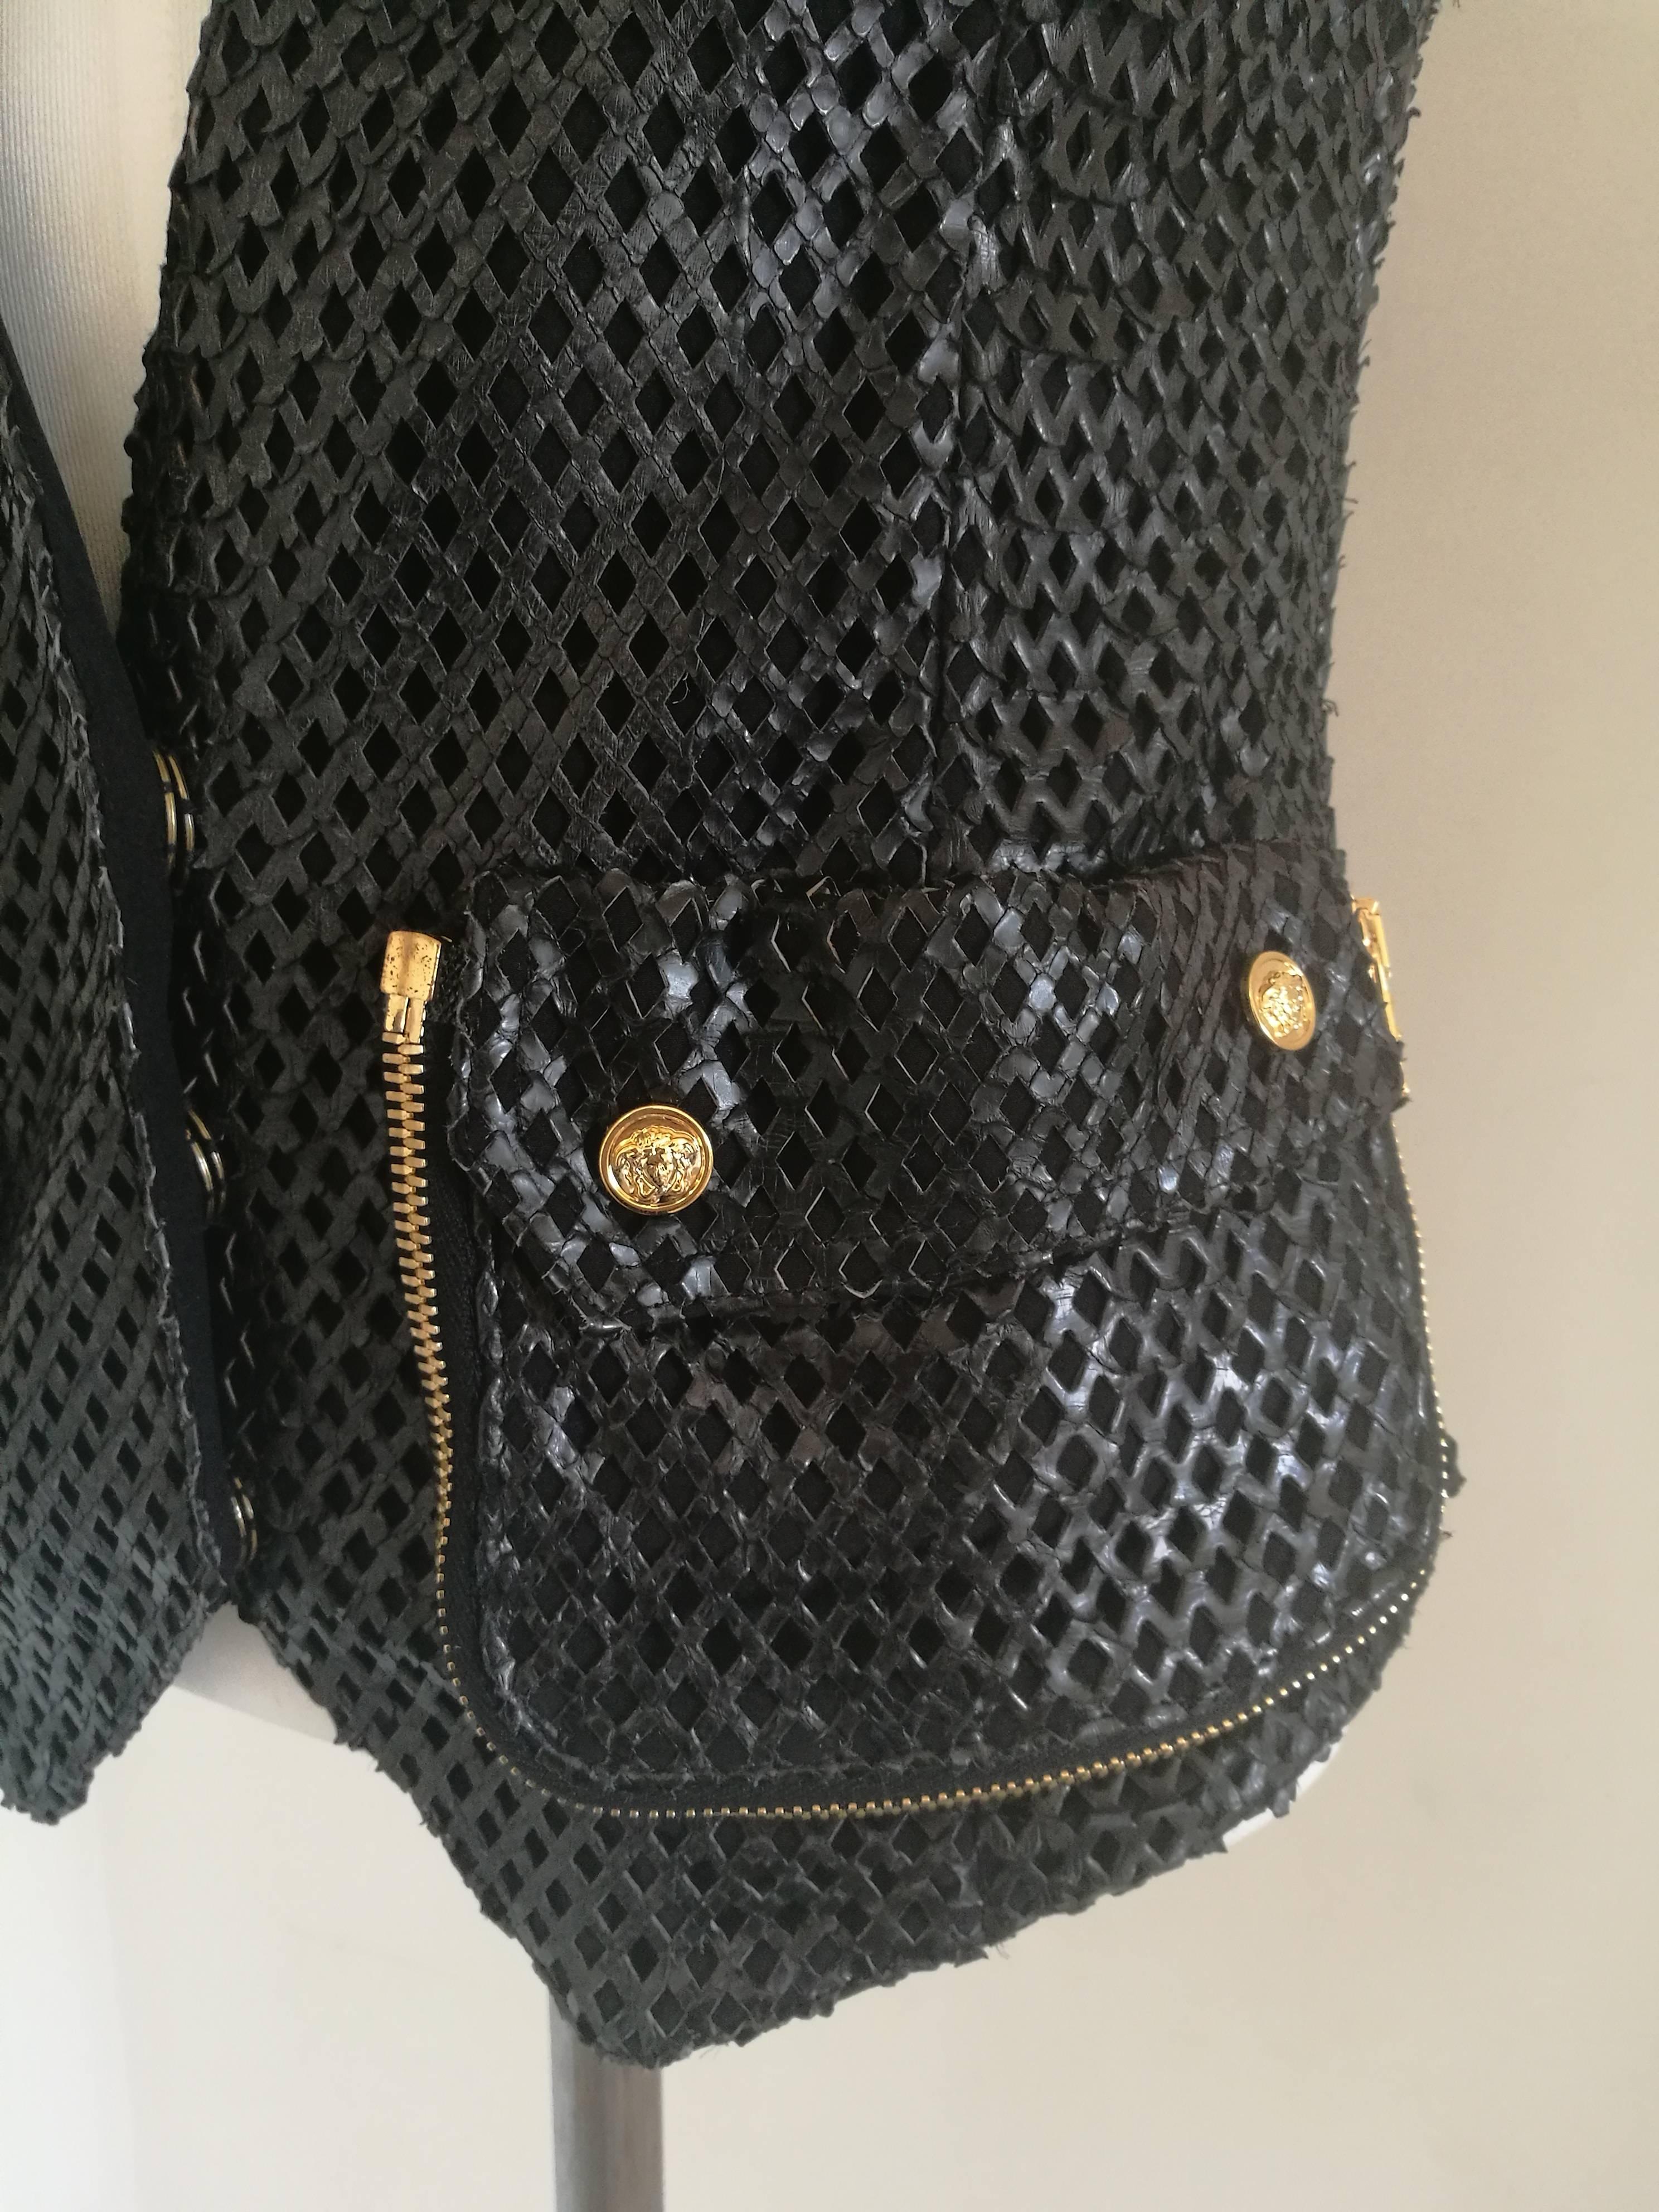 Versace Black Perforated Leather Gilet
Totally made in italy in size M 
Gold tone hardware